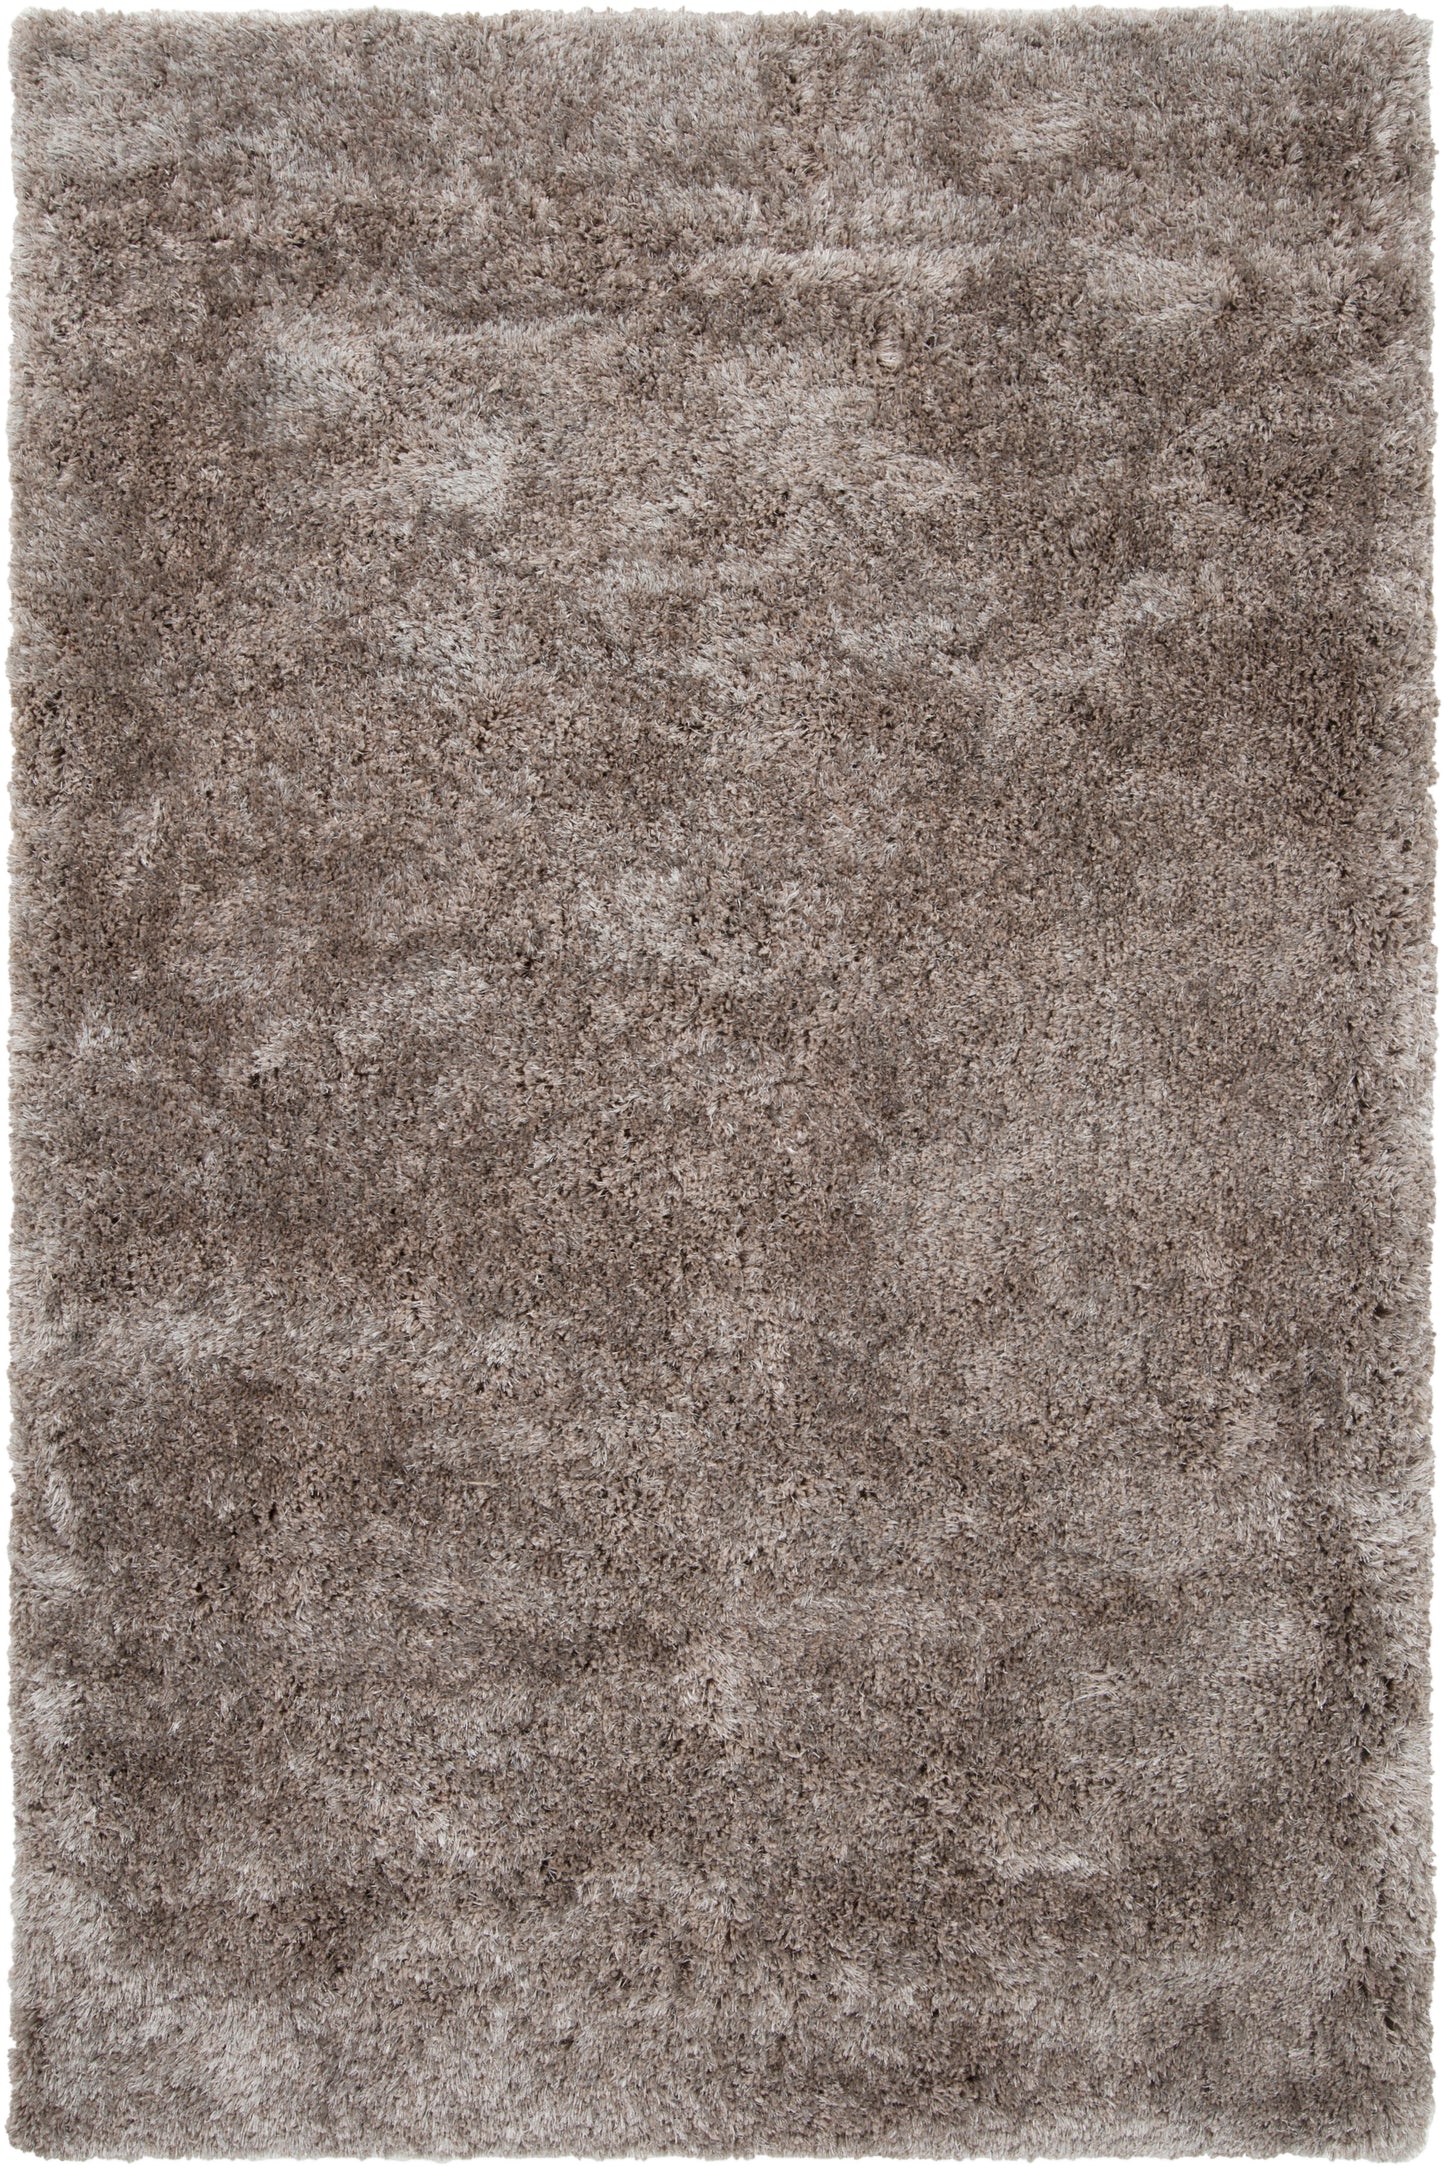 Grizzly 394 Hand Woven Synthetic Blend Indoor Area Rug by Surya Rugs